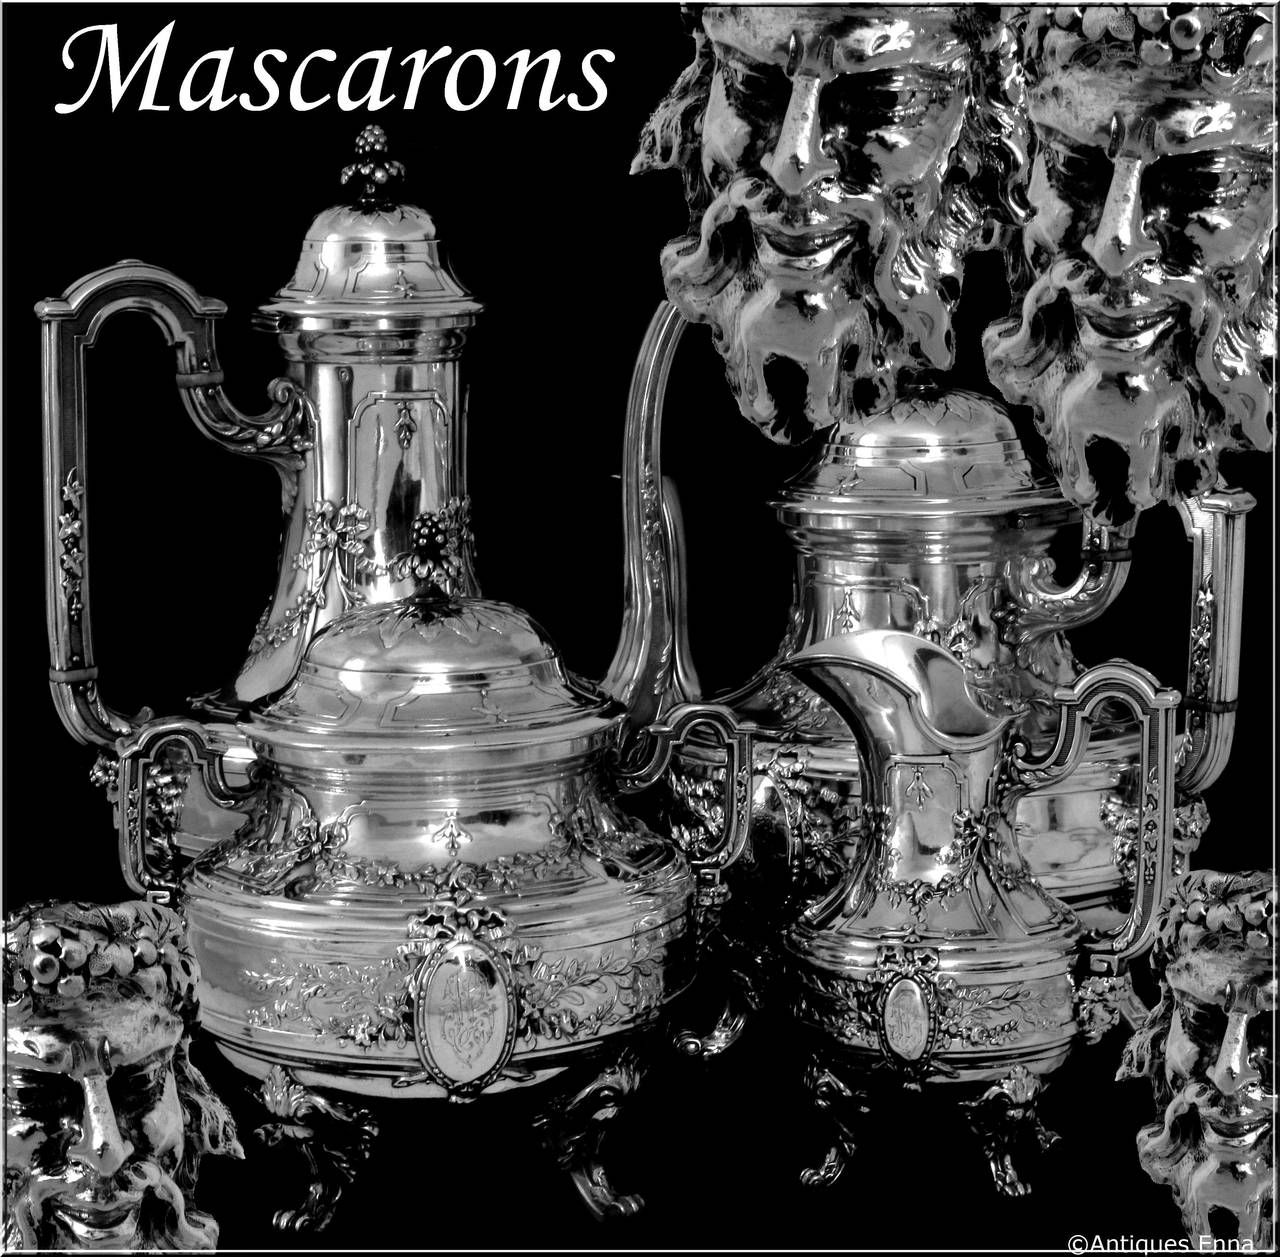 Tetard Fabulous French All Sterling Silver Tea & Coffee Service 4 pc Bacchus

A rare tea and coffee service 4 pc with fabulous and exaggerated Neoclassical pattern with Bacchus, ribbons, and foliage decoration. The set includes a Coffee pot, a